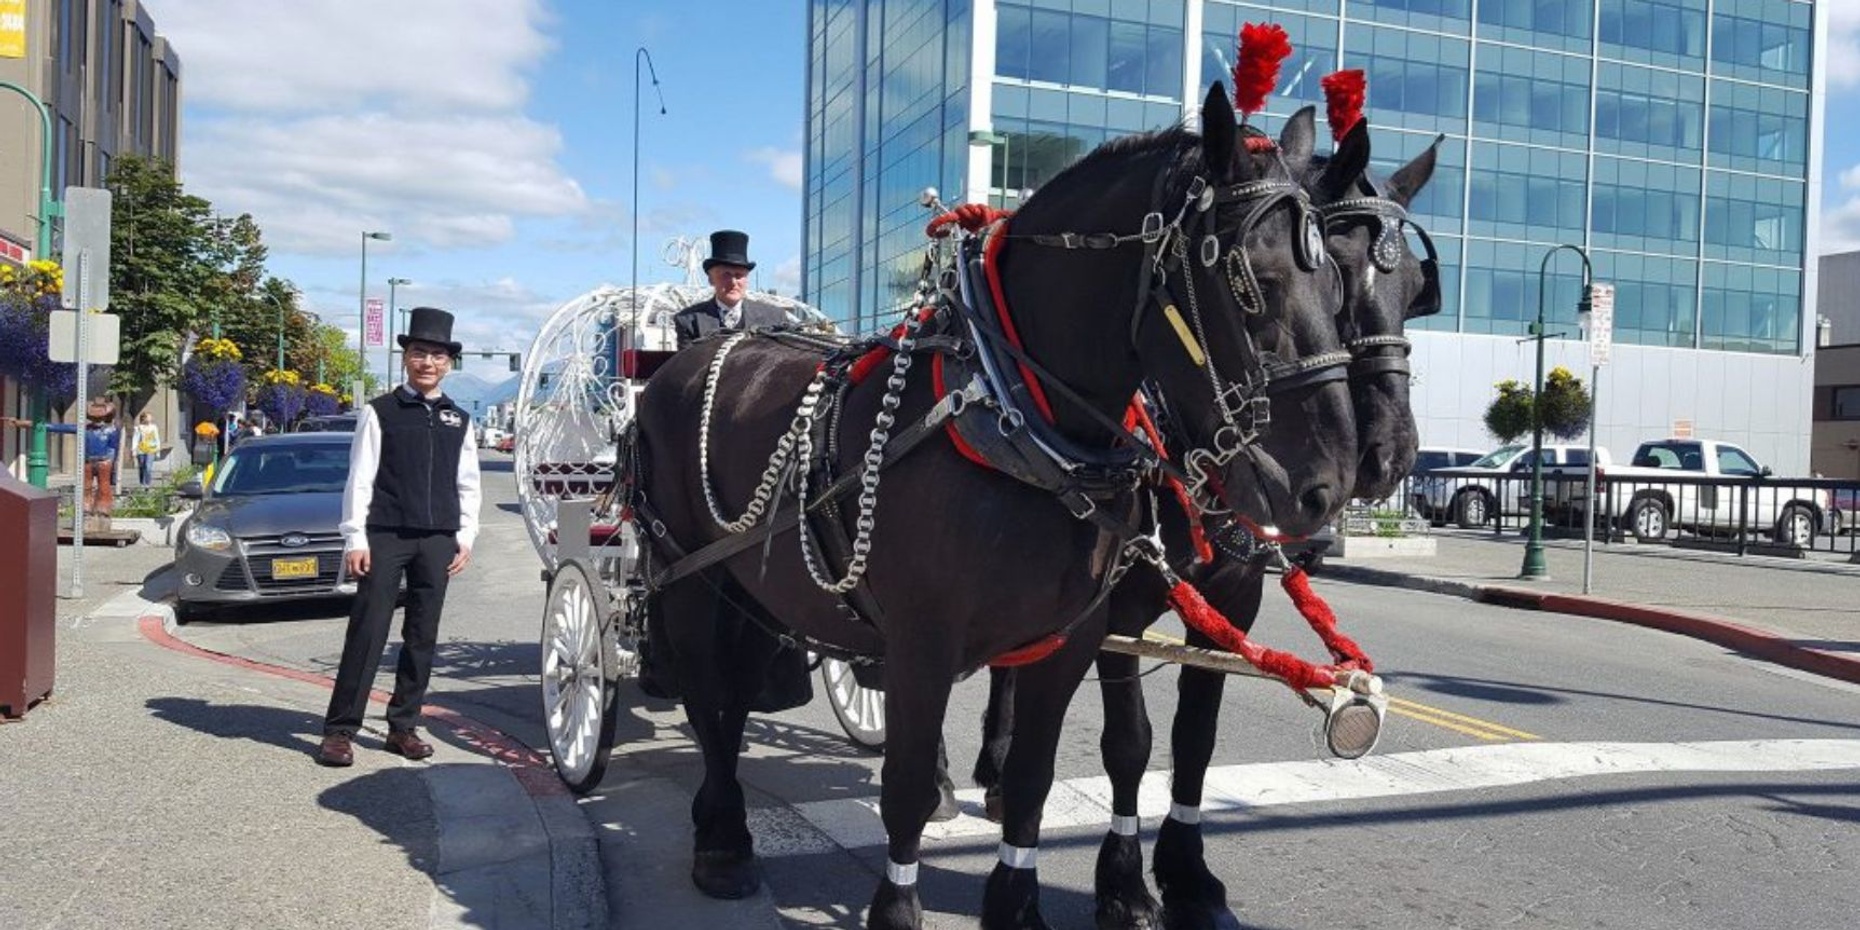 1-Hour Carriage Ride in Downtown Anchorage